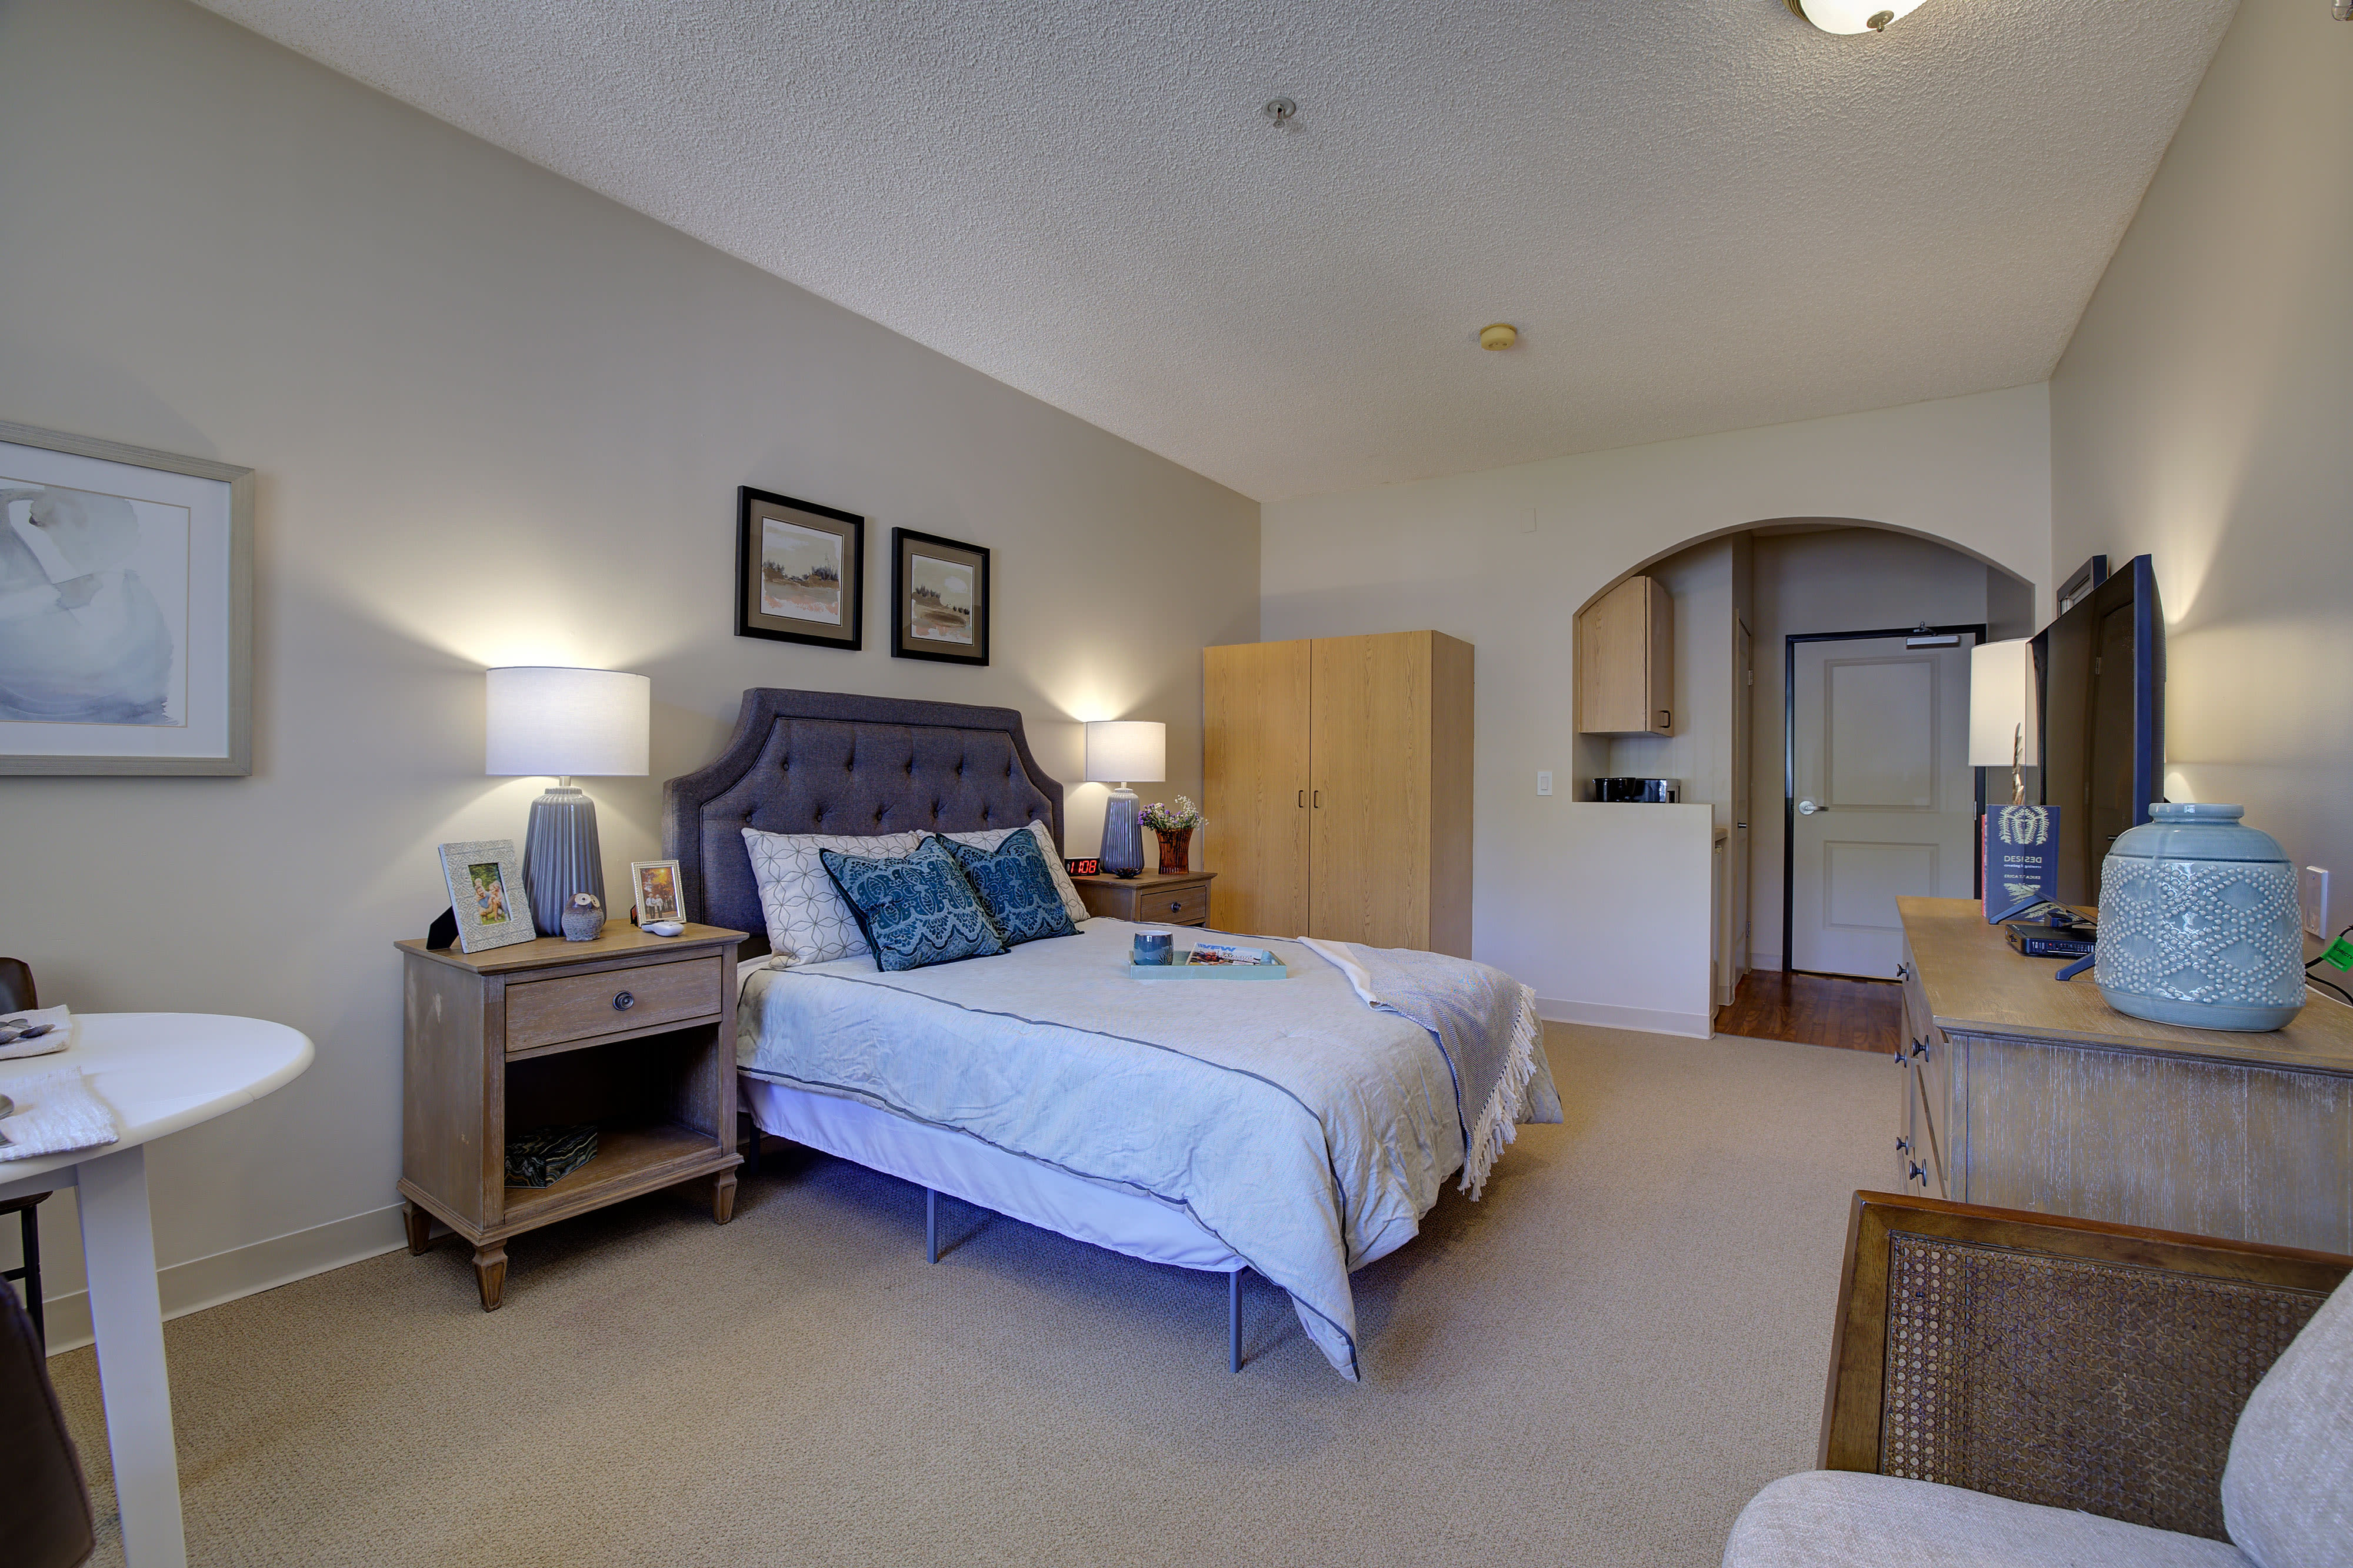 Furnished bedroom at Pacifica Senior Living Rancho Penasquitos in San Diego, California